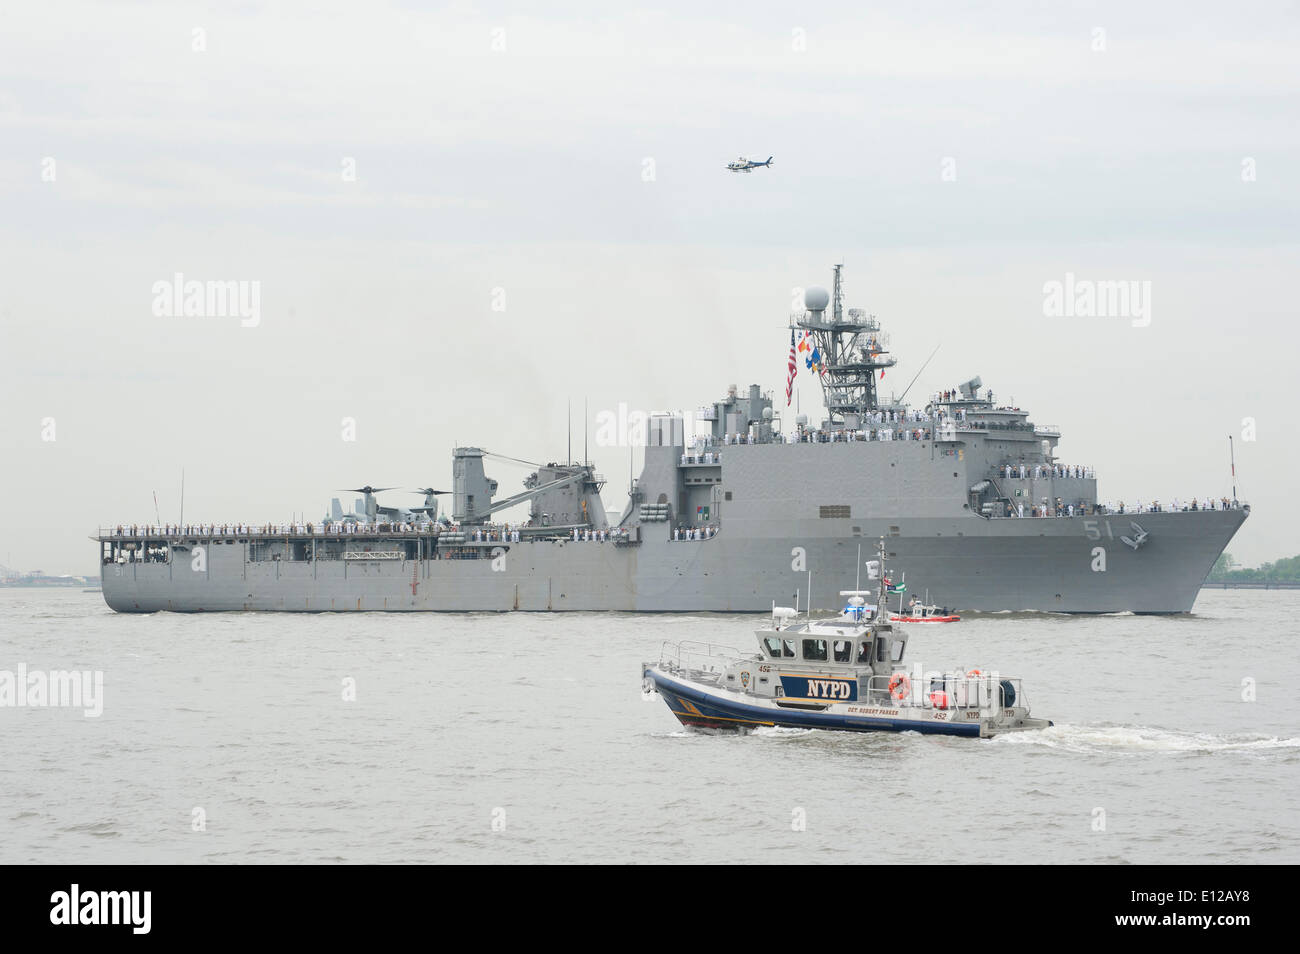 New York, NY — May 21, 2014. The USS Oak Hill (LSD-51), an amphibious ship carrying both U.S. Navy and U.S. Marine personnel, arrived in New York harbor on May 21, 2014 at the start of Fleet Week. The USS Oak Hill was commissioned in June 1996 and has served in the Mediterranean Sea, the Persian Gulf and on the Horn of Africa. Fleet Week brings around 1,500 sailors, marines and U.S. Coast Guardsmen to New York City, with ship tours, aerial demonstrations and parades. Credit:  Terese Loeb Kreuzer/Alamy Live News Stock Photo